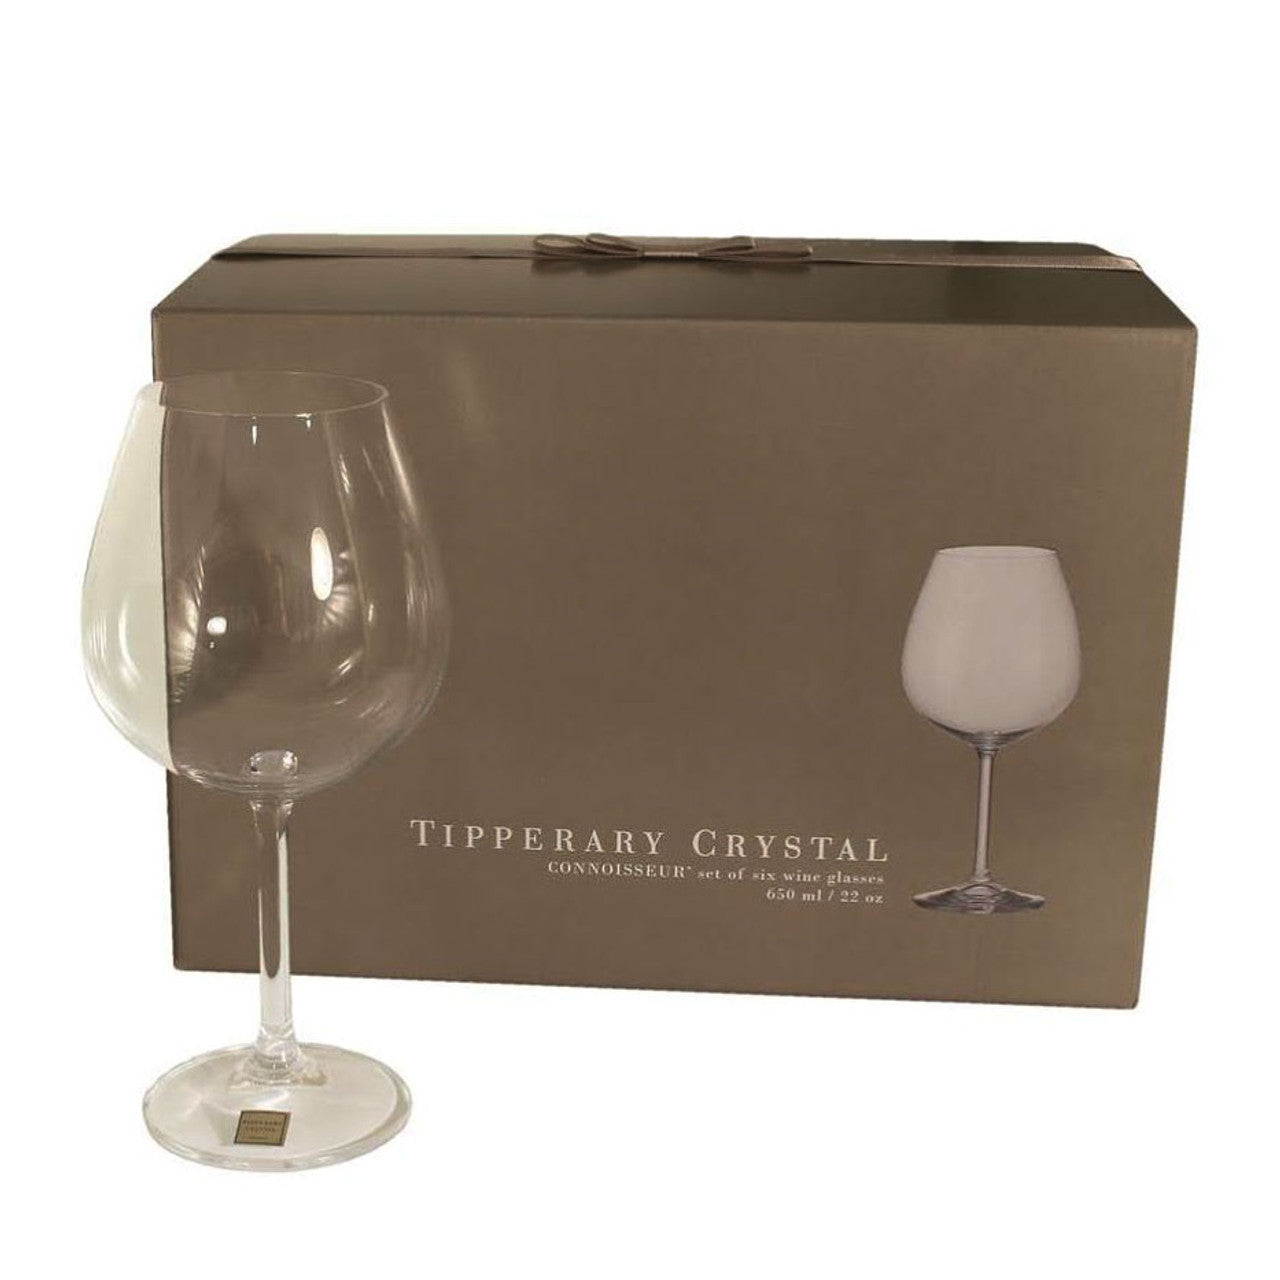 Tipperary Crystal Connoisseur Set of 6 Wine Glasses 650ml